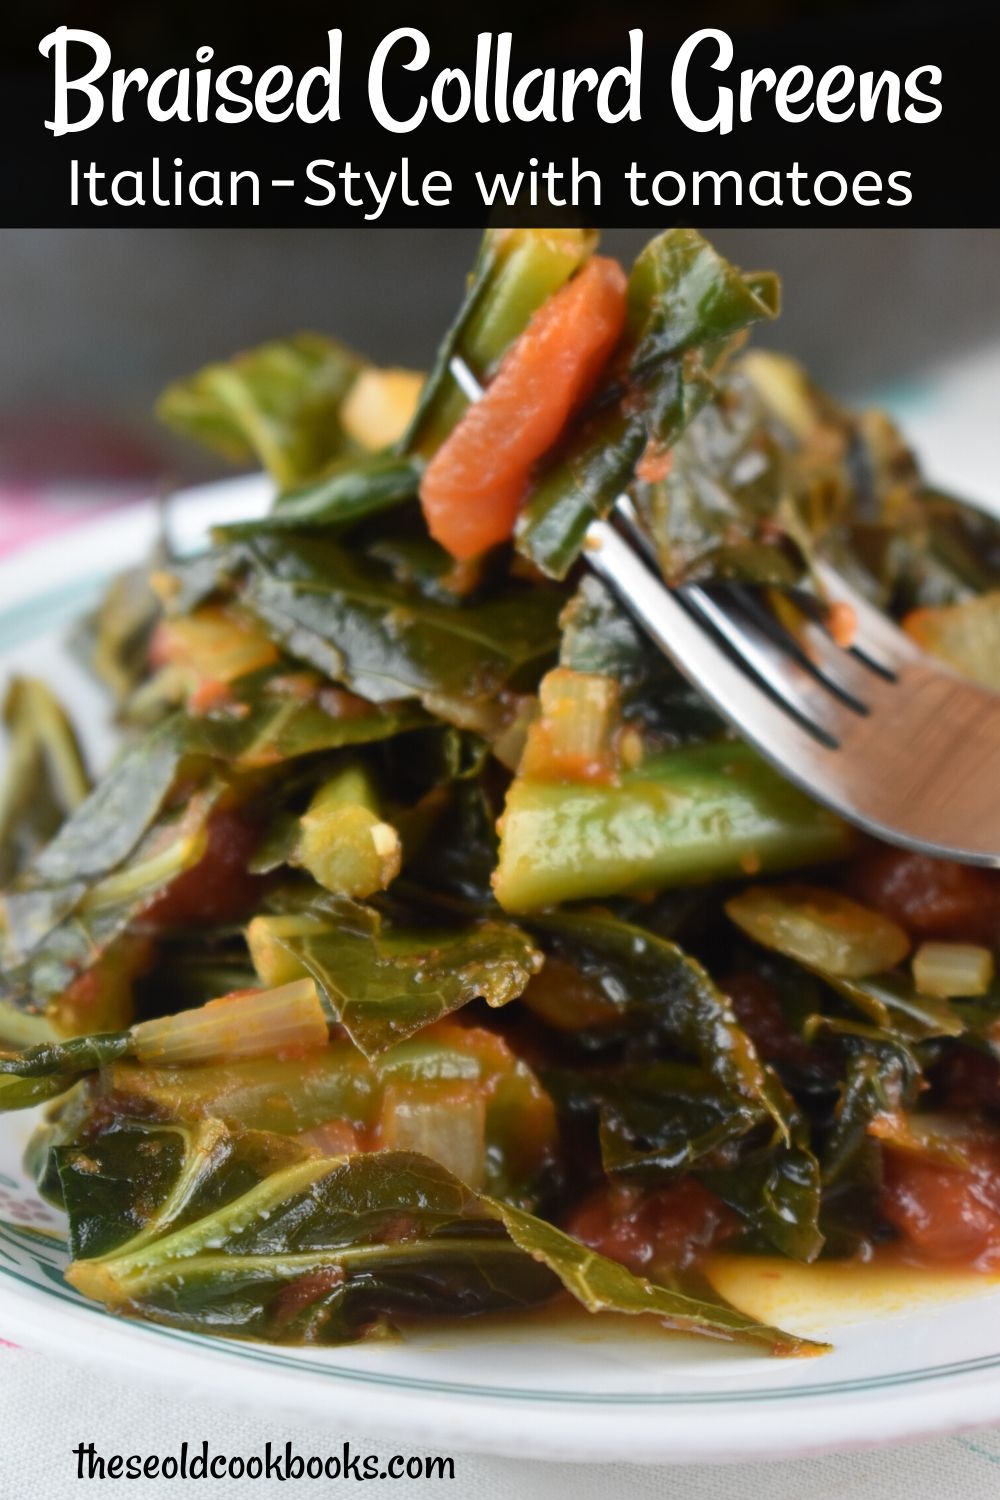 Braised Collard Greens with Tomatoes is a simple new spin on collard greens. This Italian-inspired recipe might be the first step to getting your family to eat their greens.